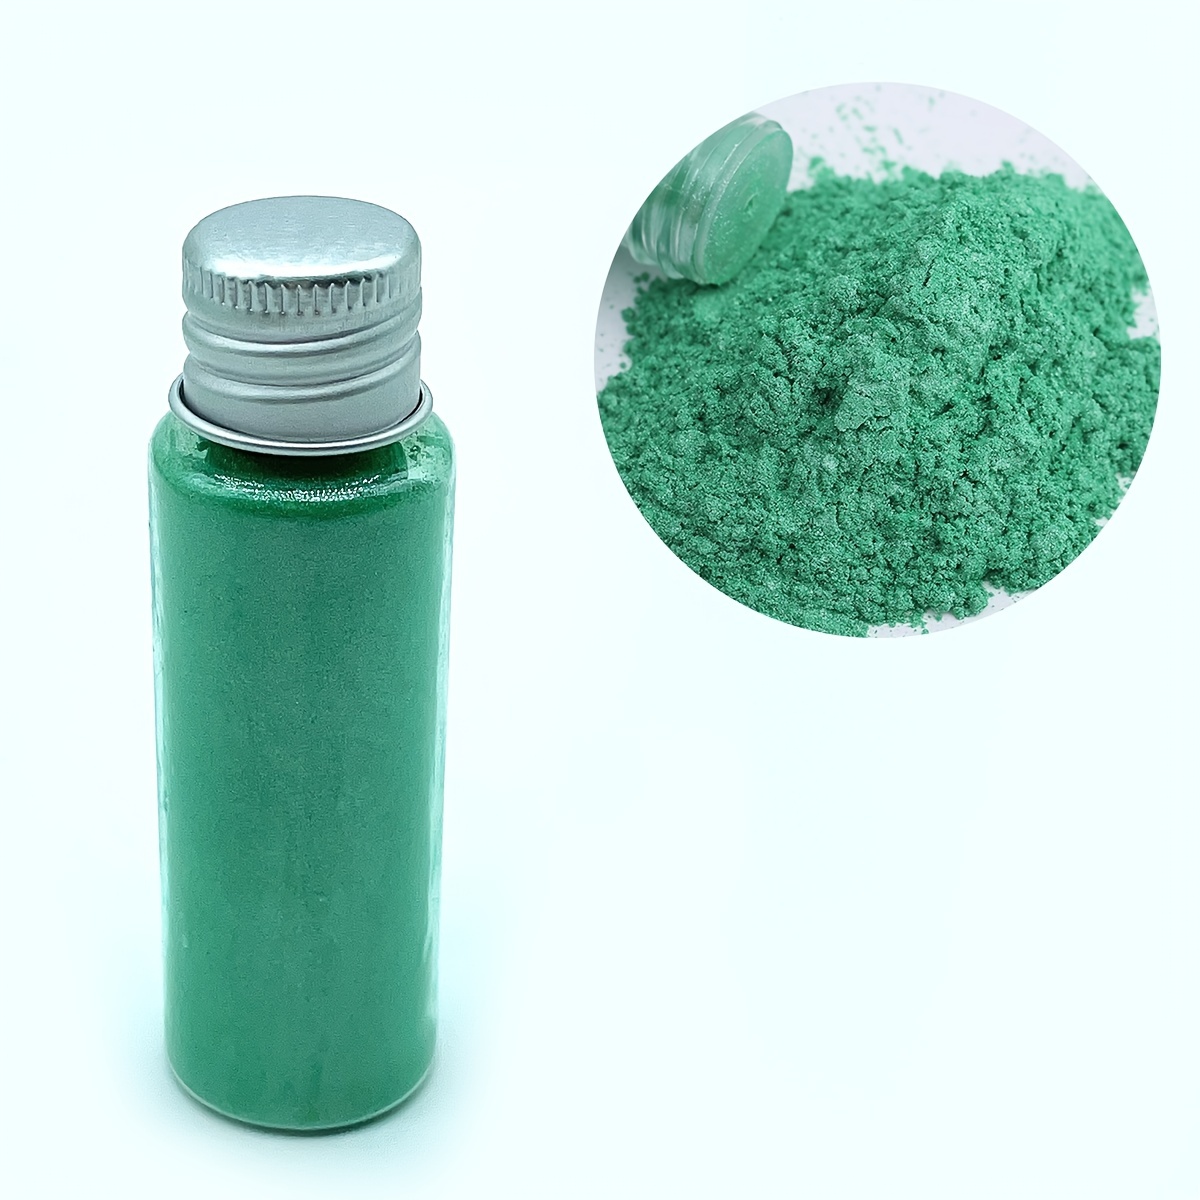 Neon Green Resin Pigment Paste 30ml in a no mess easy Pump bottle